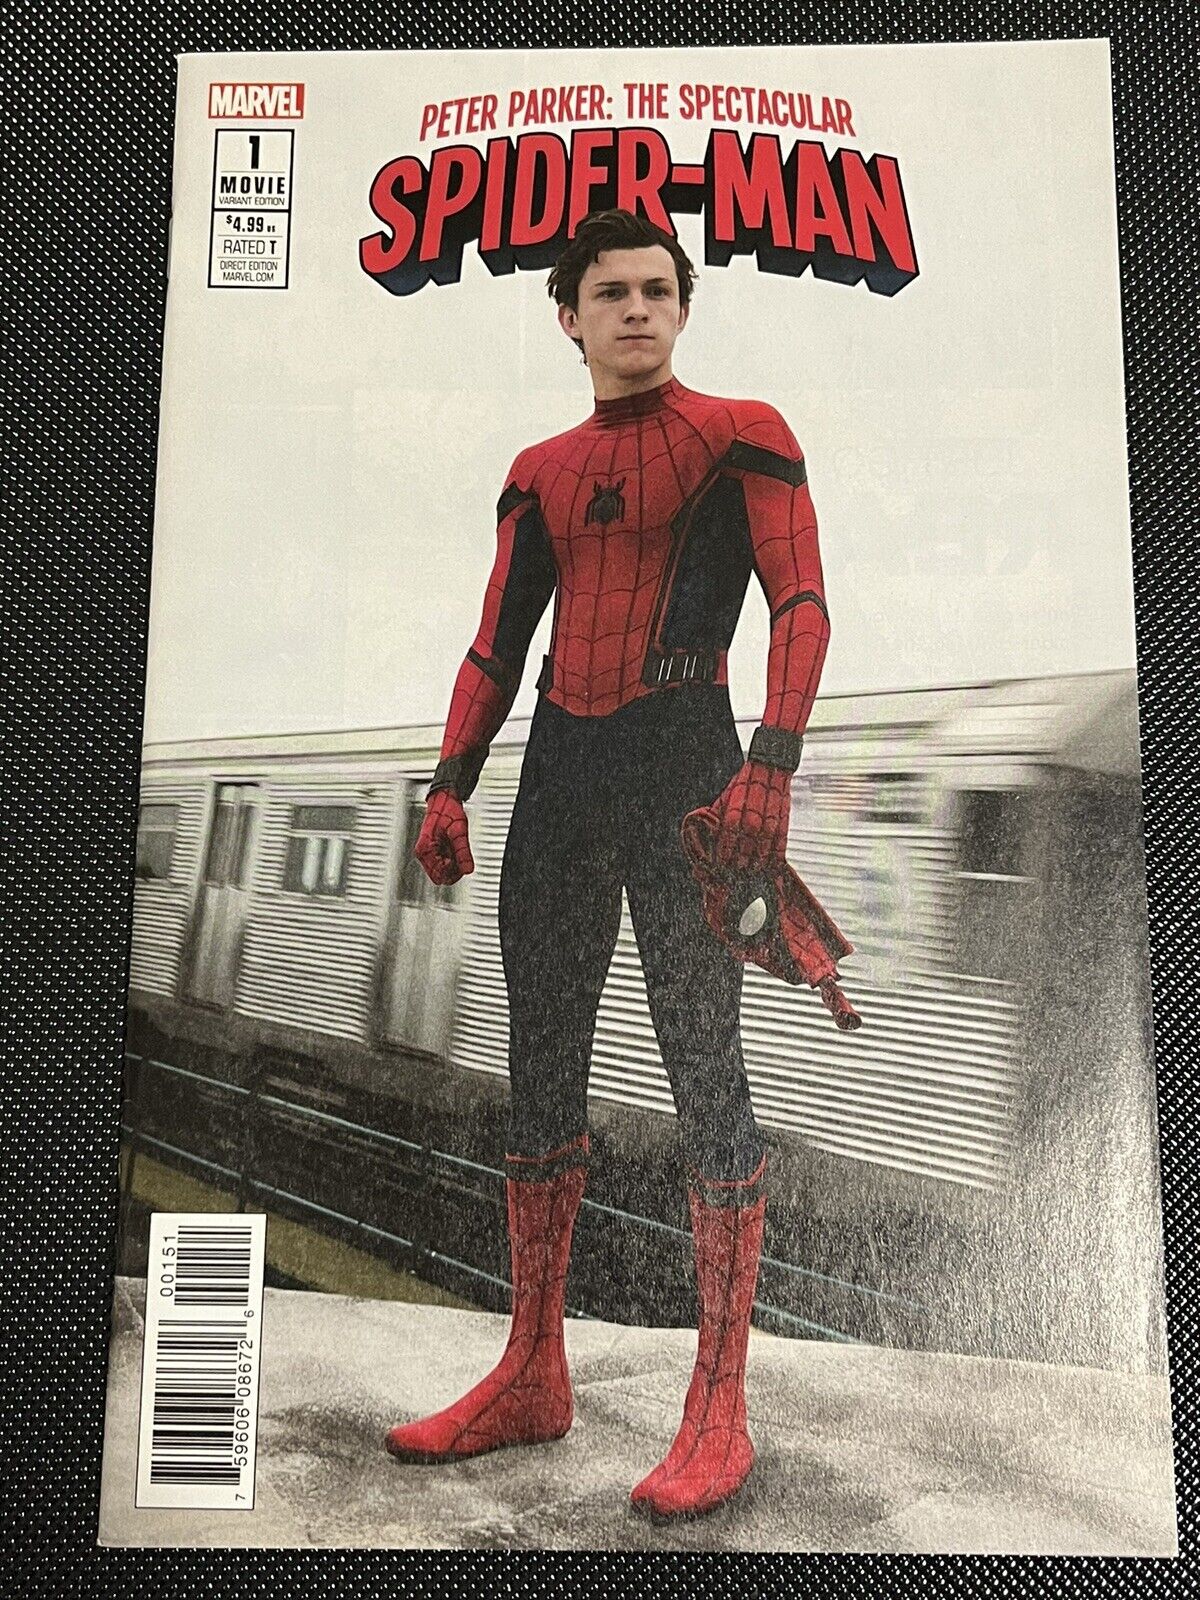 Peter Parker Spectacular Spider-man #1 Movie Photo Variant. NM- Or Better